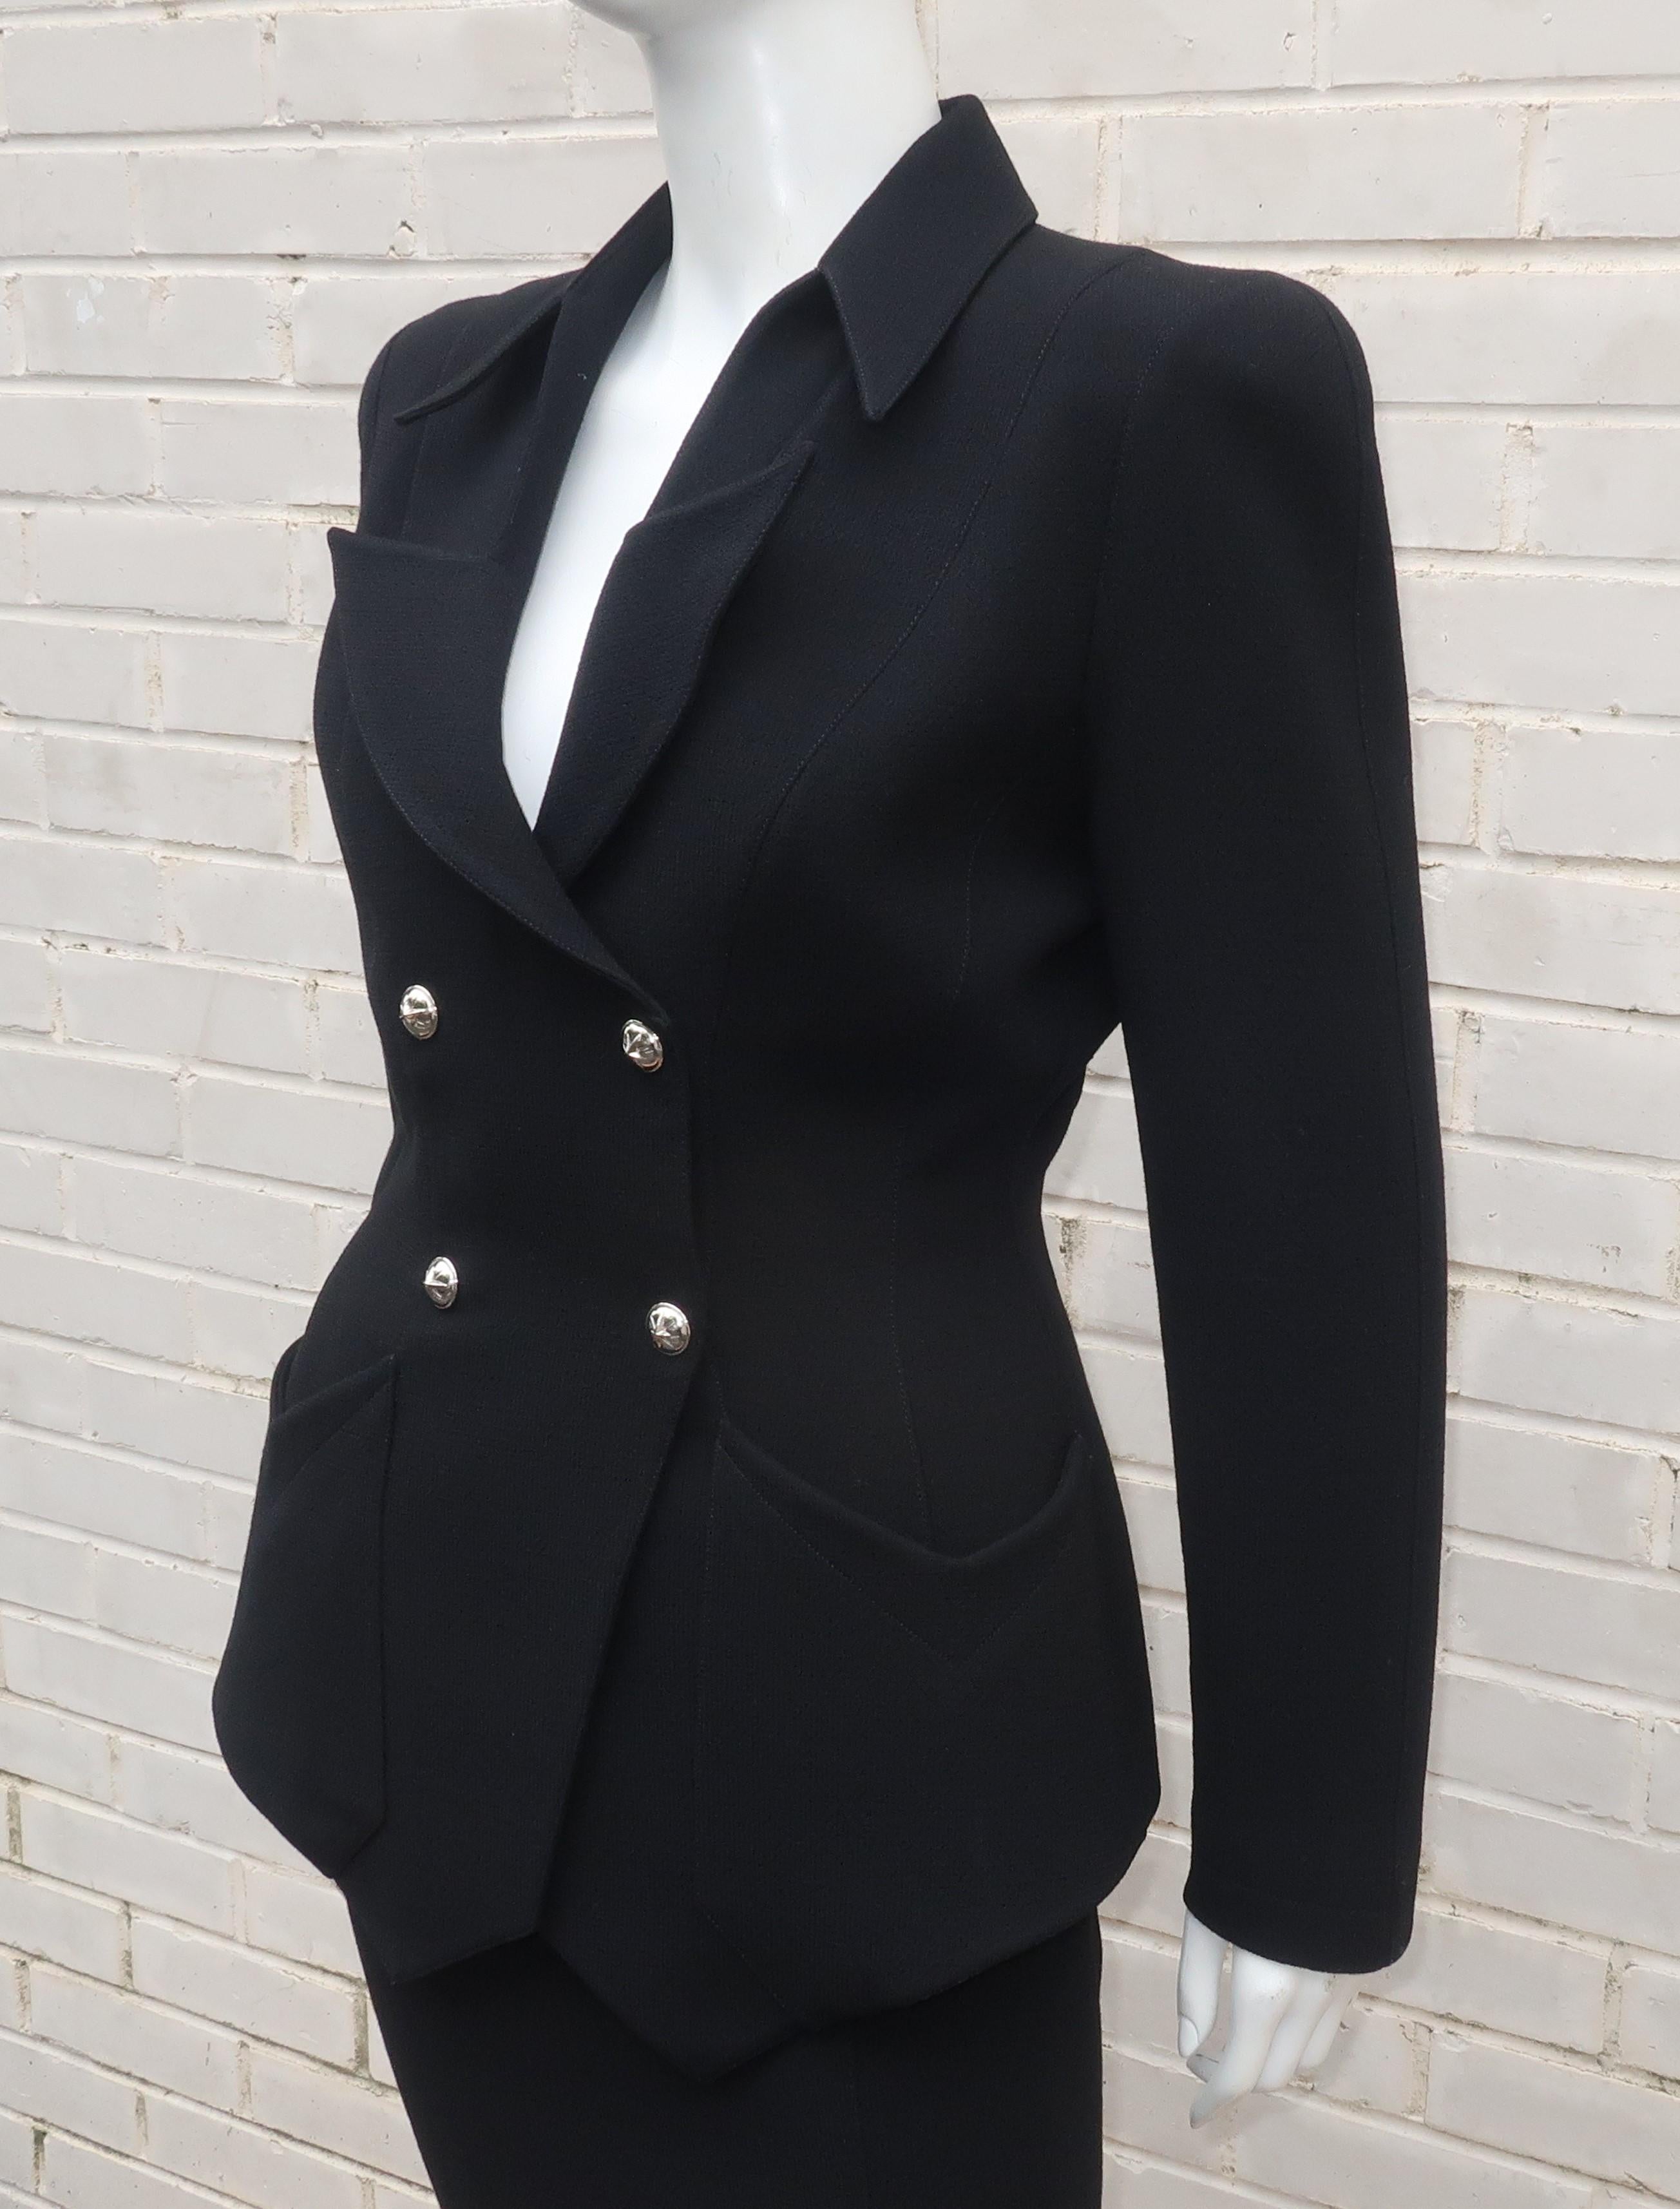 Thierry Mugler Black Skirt Suit With Star Buttons 1